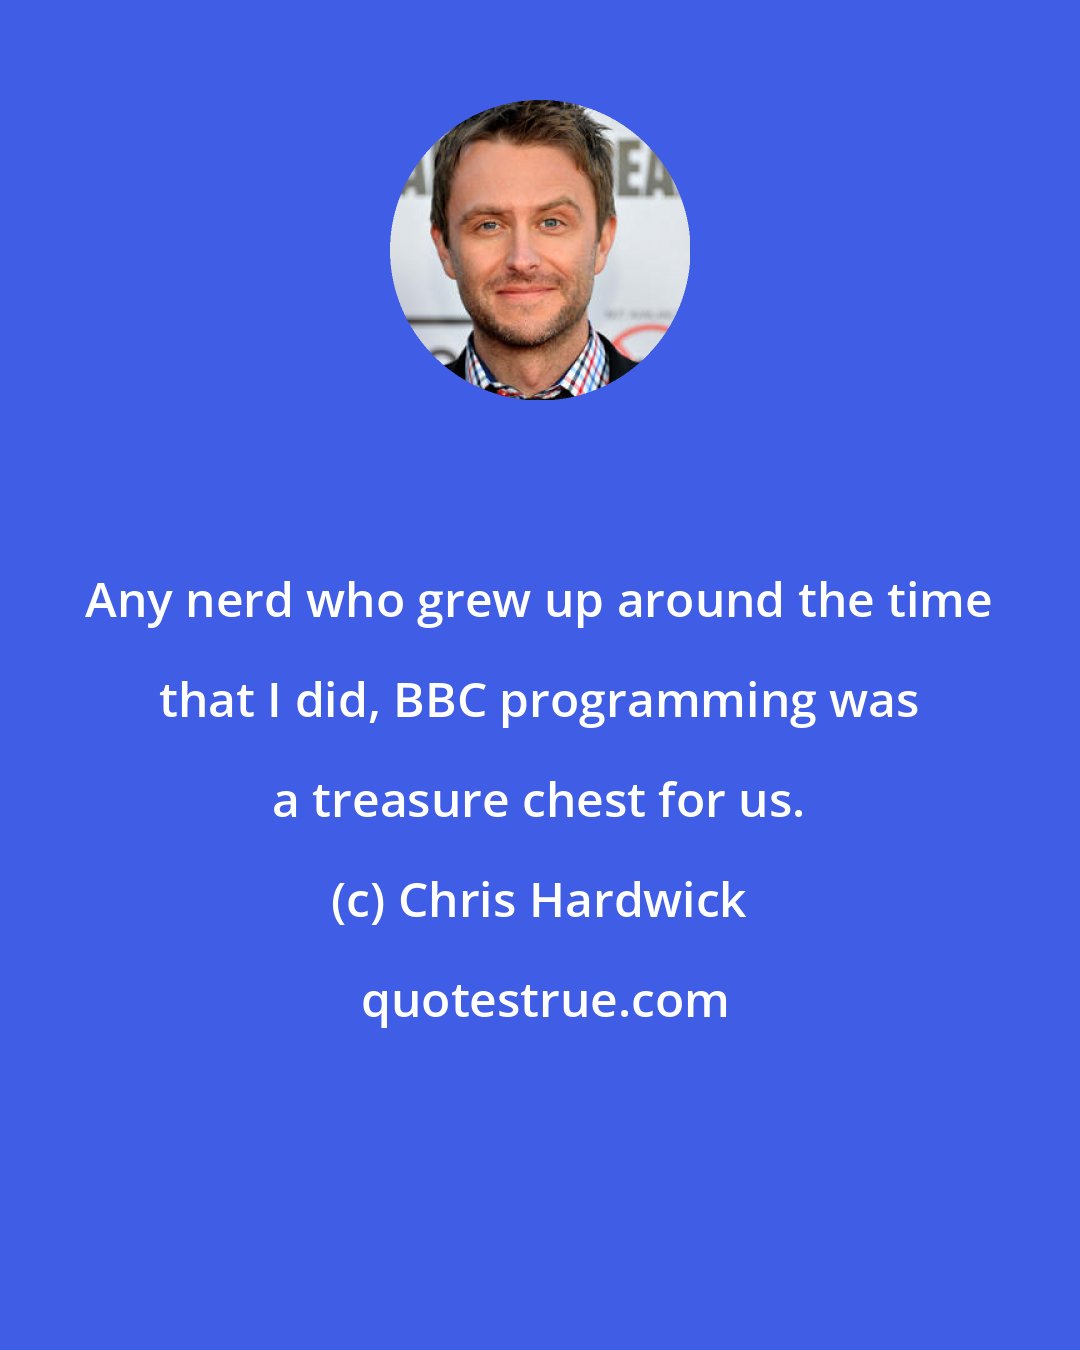 Chris Hardwick: Any nerd who grew up around the time that I did, BBC programming was a treasure chest for us.